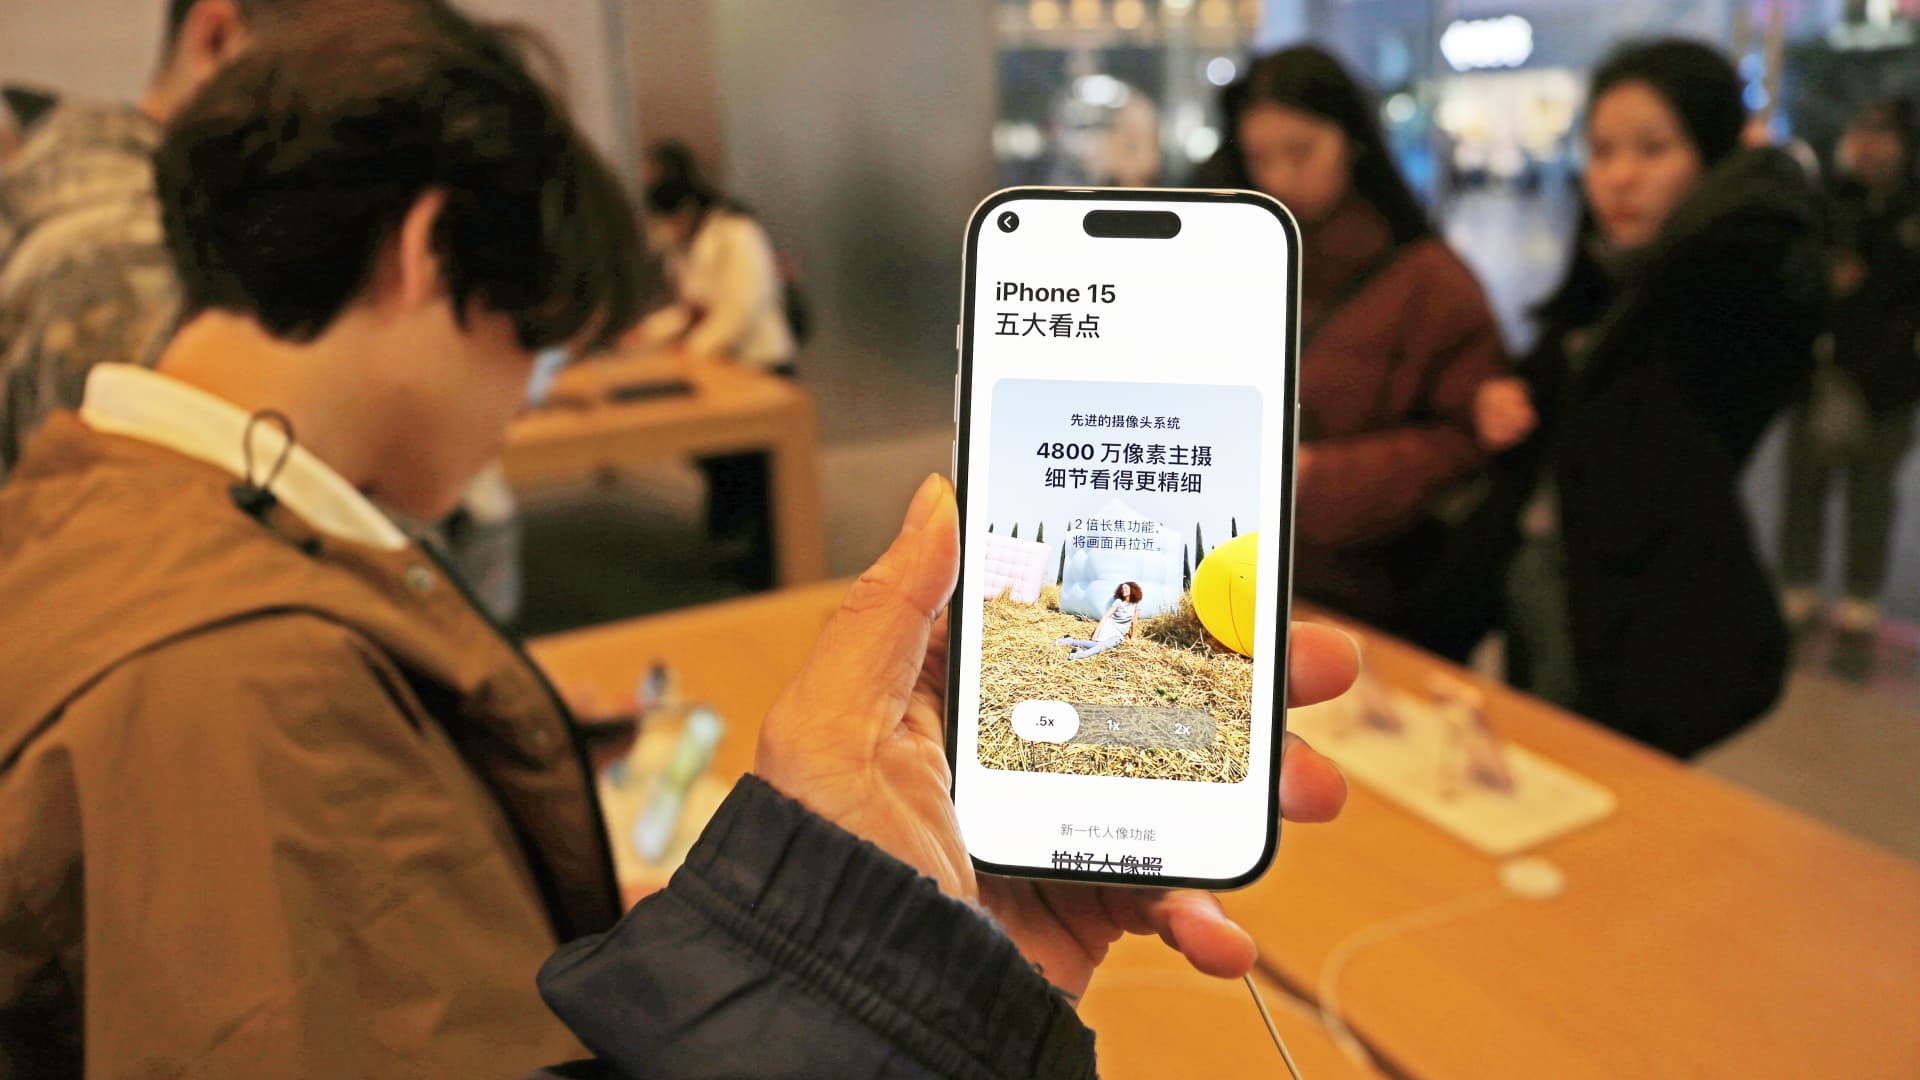 Apple is offering a rare iPhone discount in China as concerns over demand grow